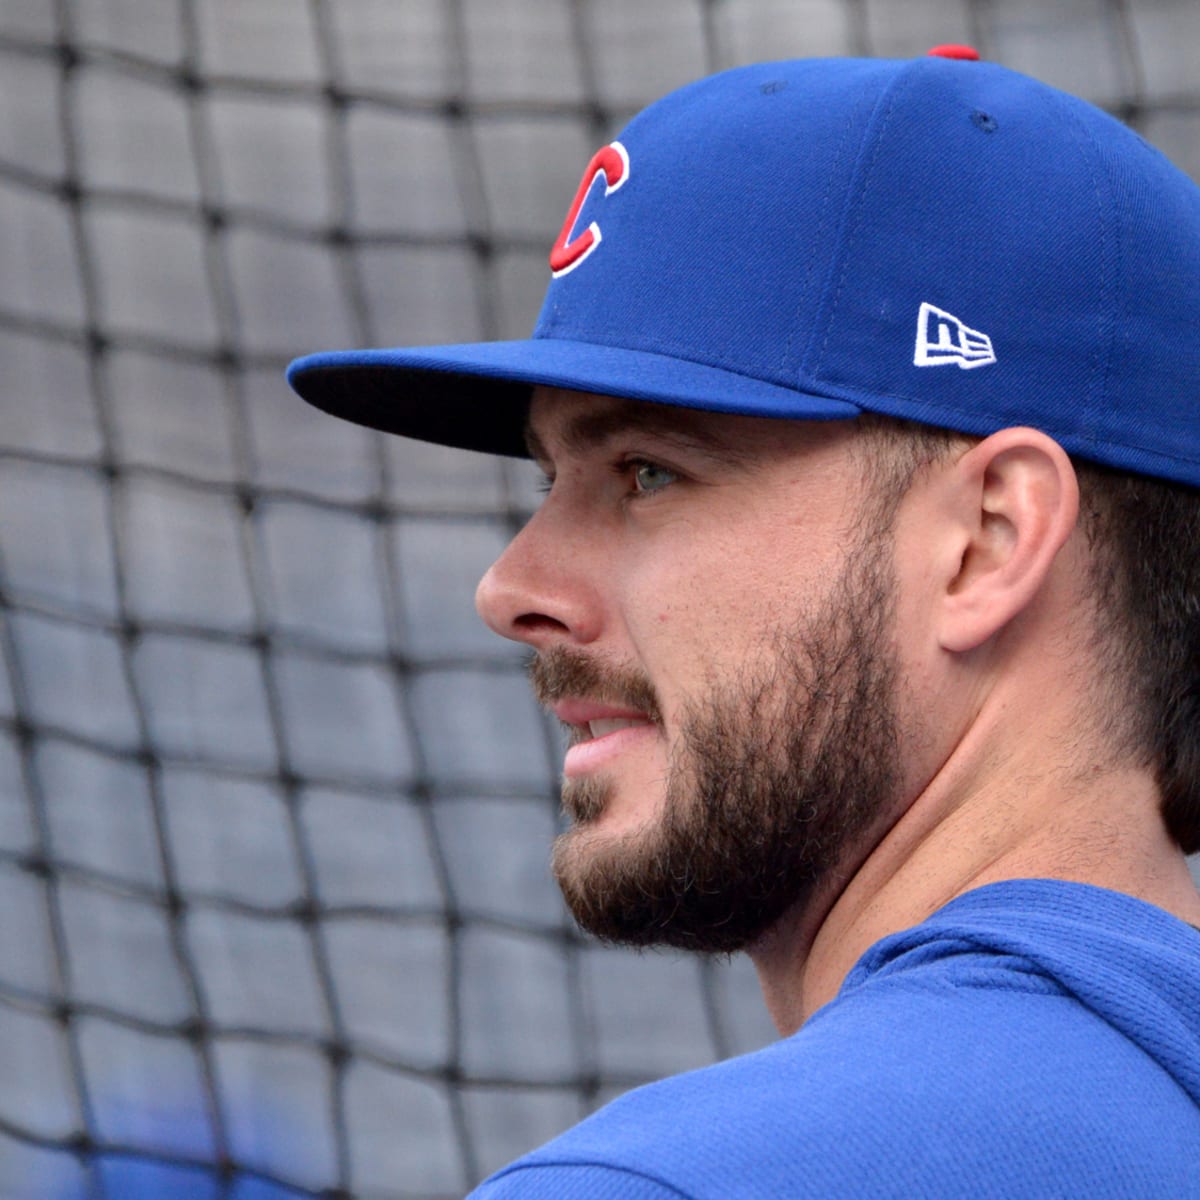 Kris Bryant trade chatter, a trade proposal, and myth busting - Bleed  Cubbie Blue